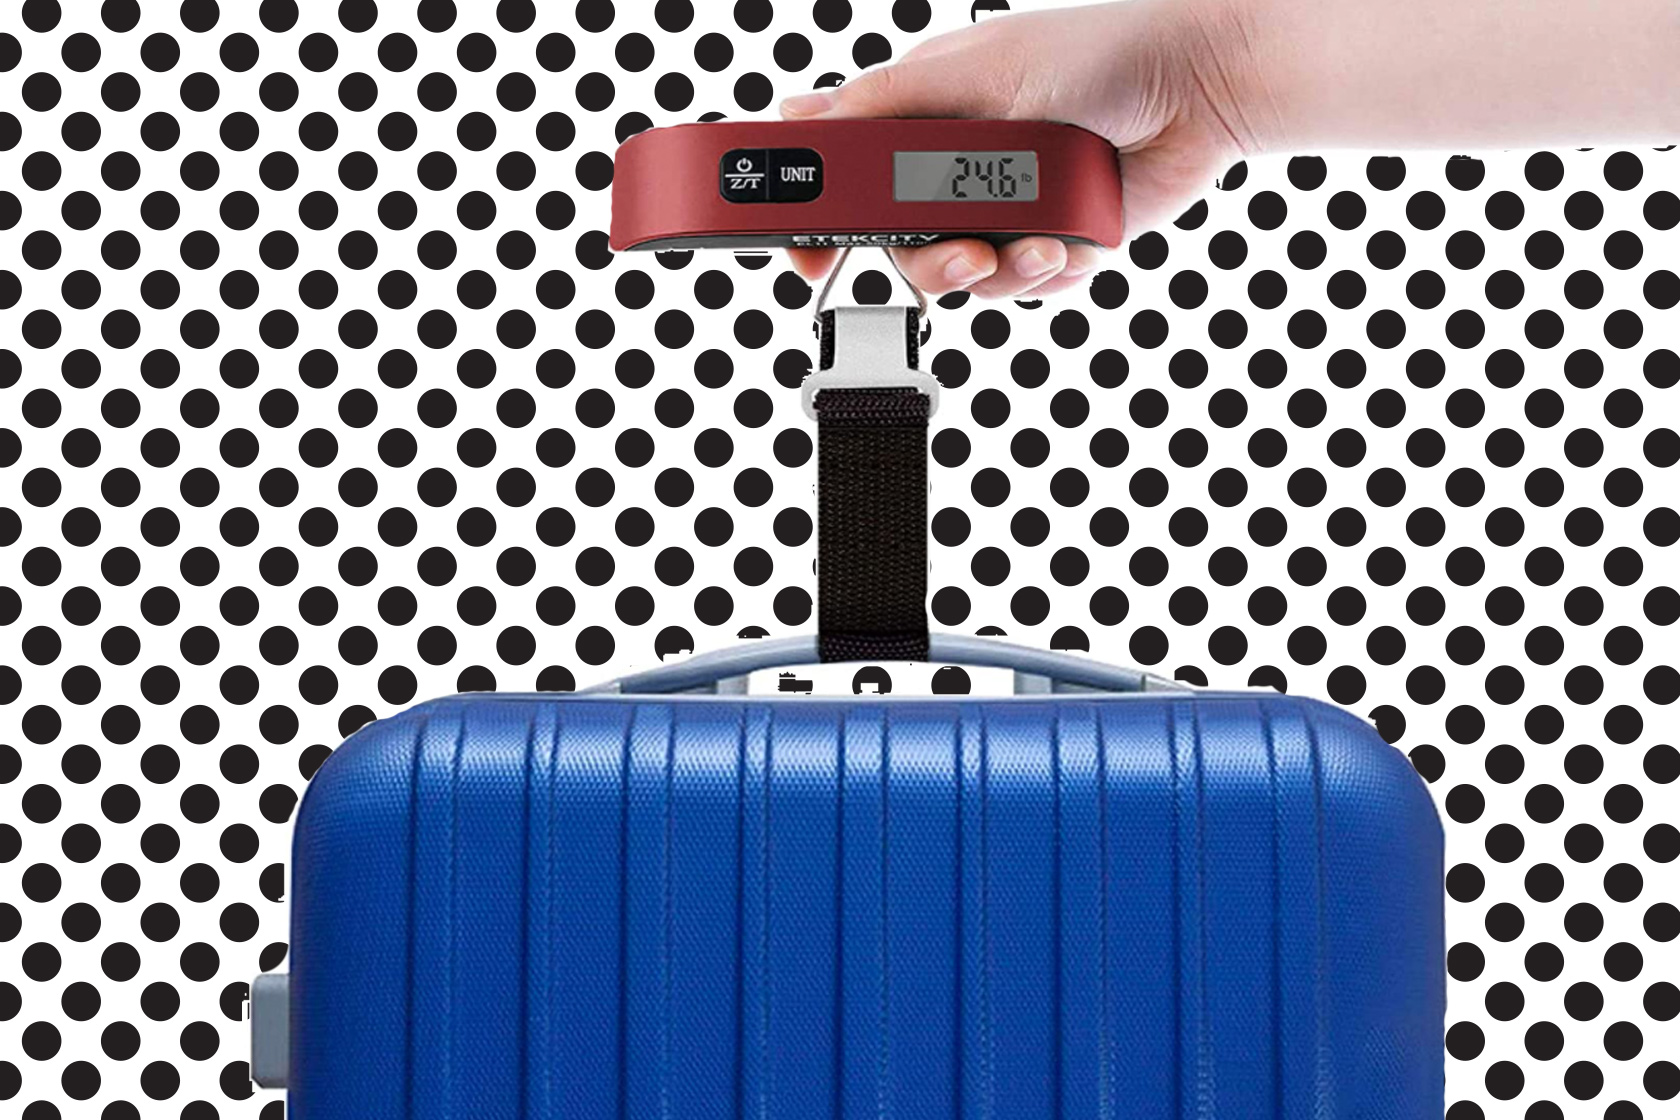 Say goodbye to hideous fees with this portable luggage scale